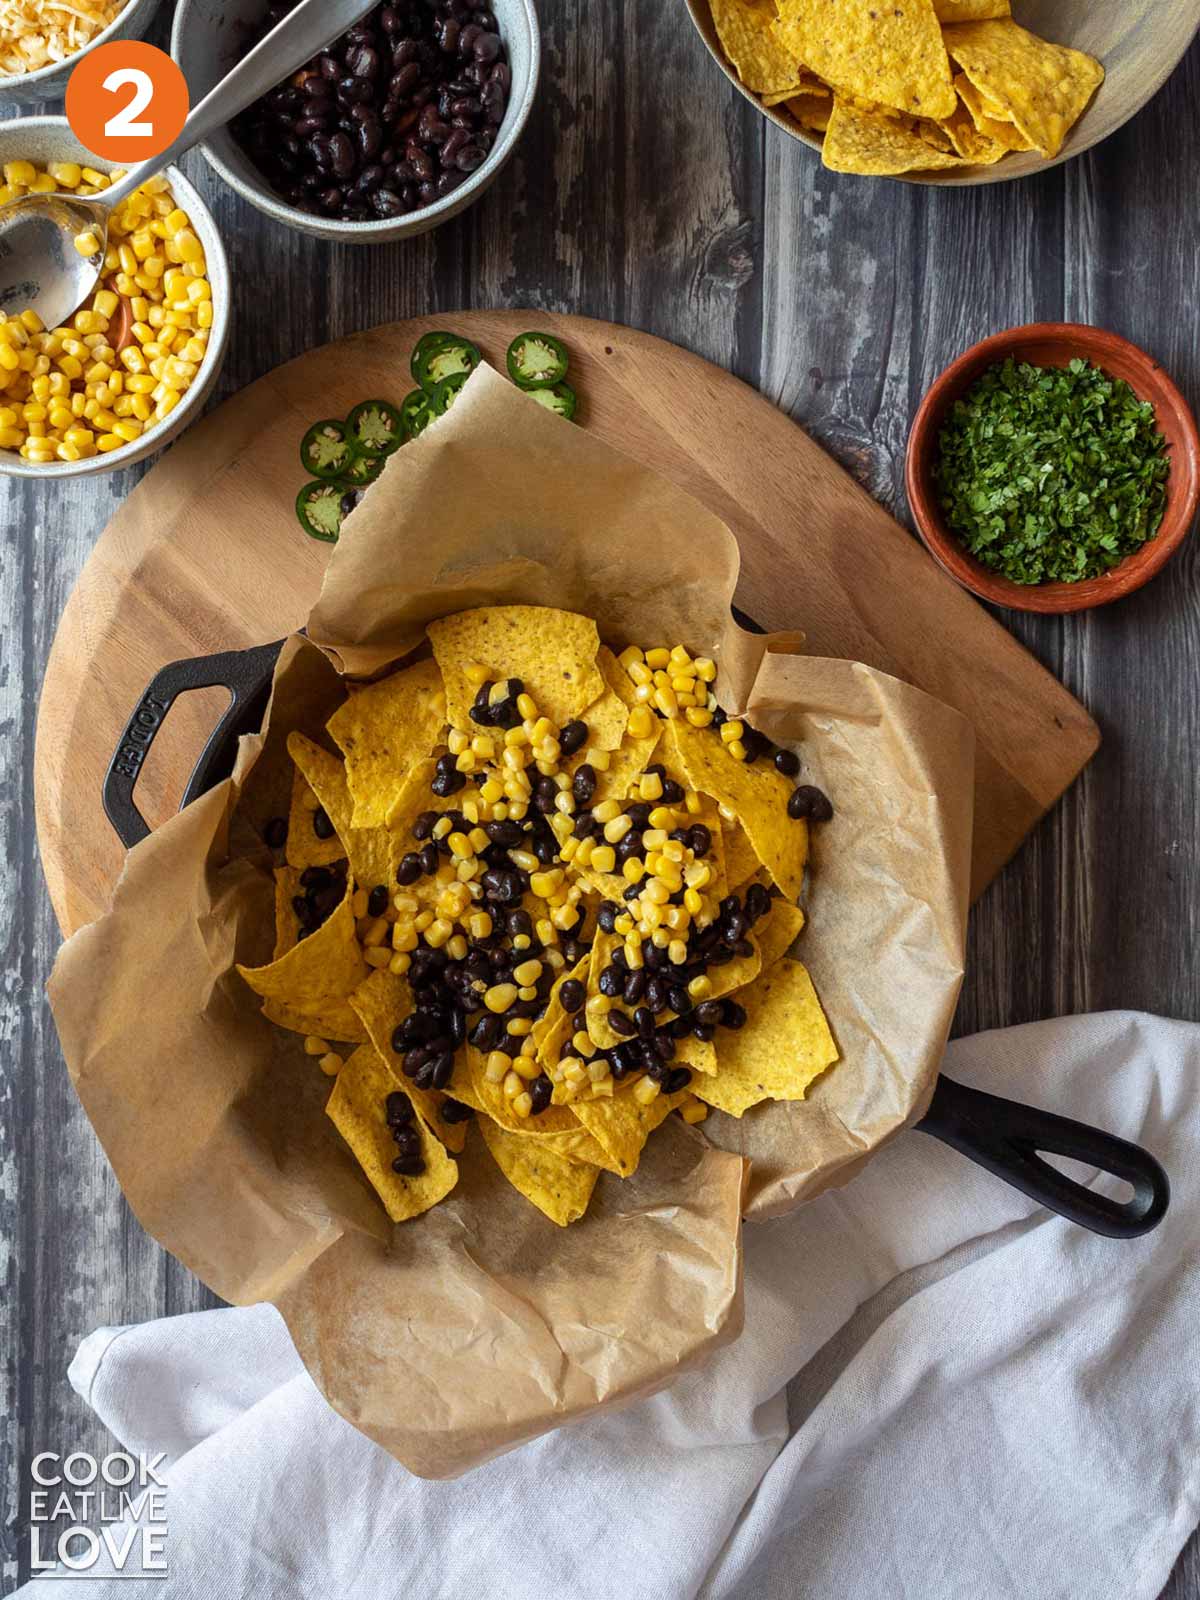 Corn and black beans added on top of the chips to make vegetarian nachos.